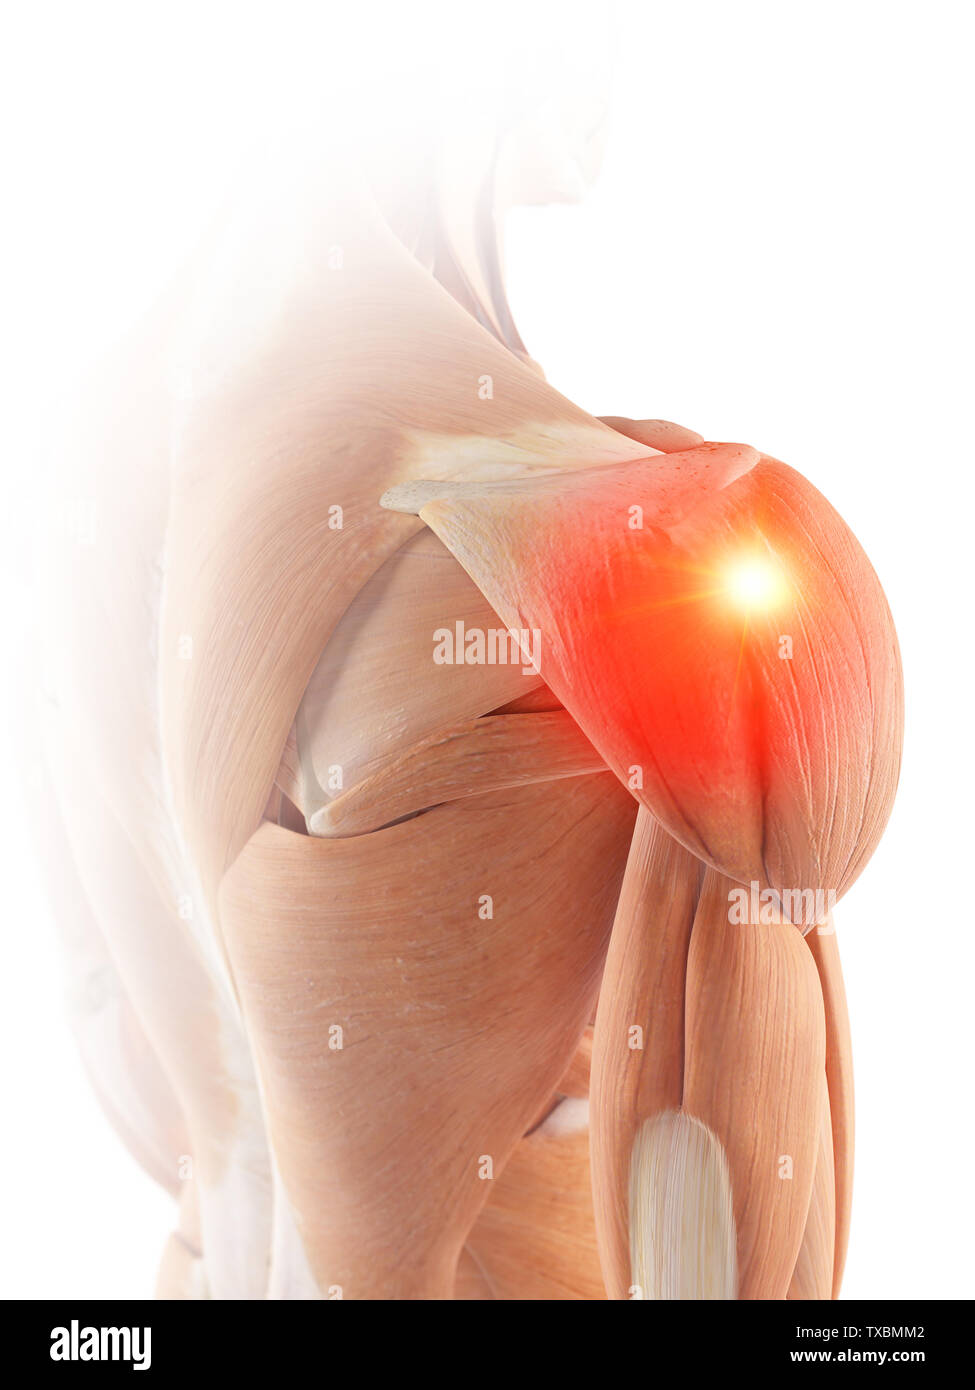 medical accurate illustration of the shoulder muscles showing pain Stock Photo